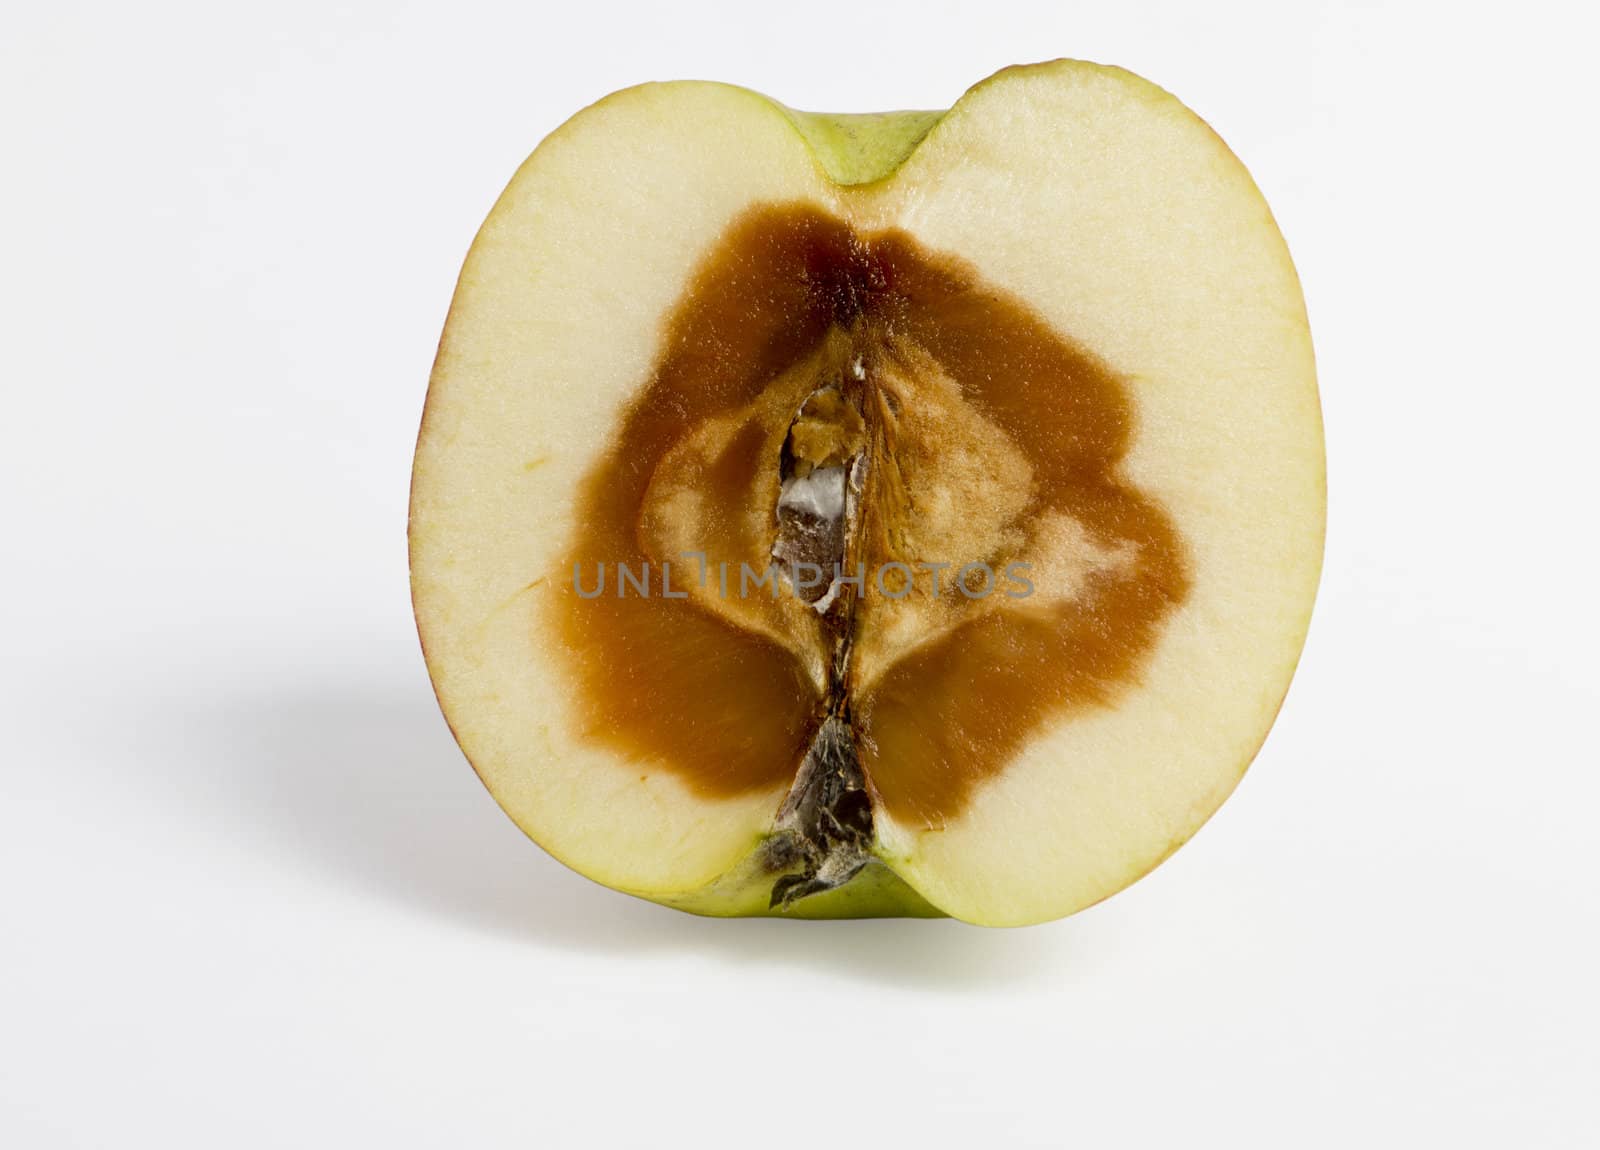 feculent apple rotten from the center - with clipping path by gewoldi